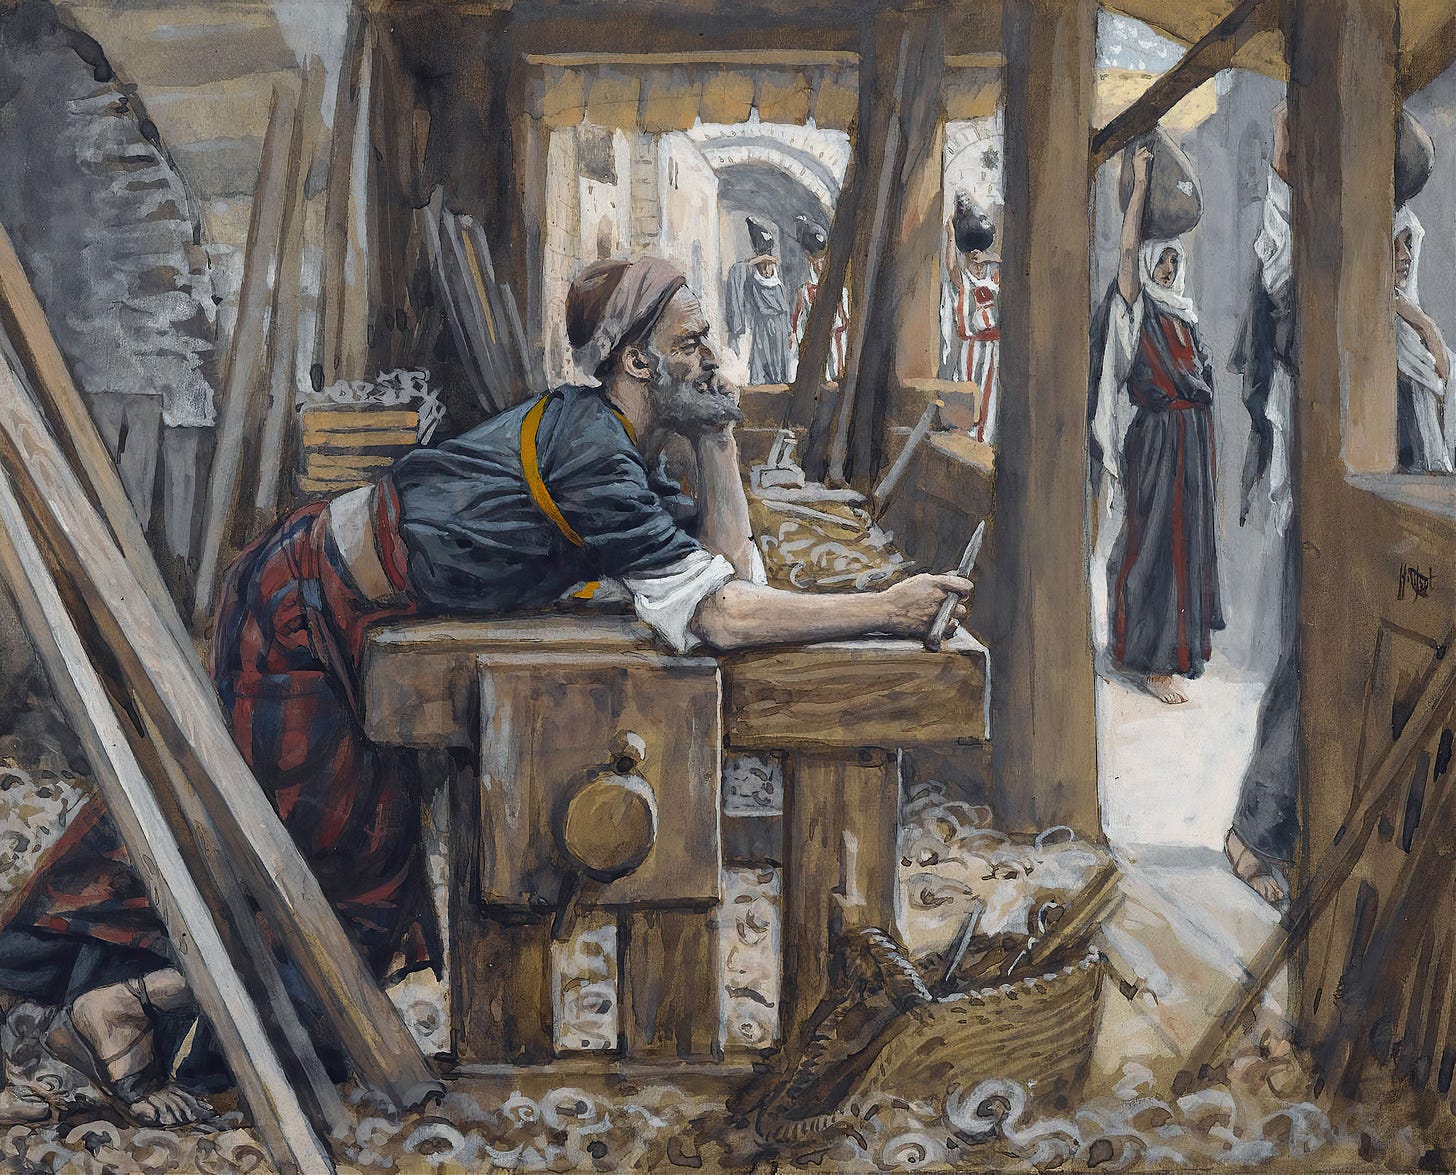 The Anxiety of Saint Joseph (1886-1894) by James Tissot